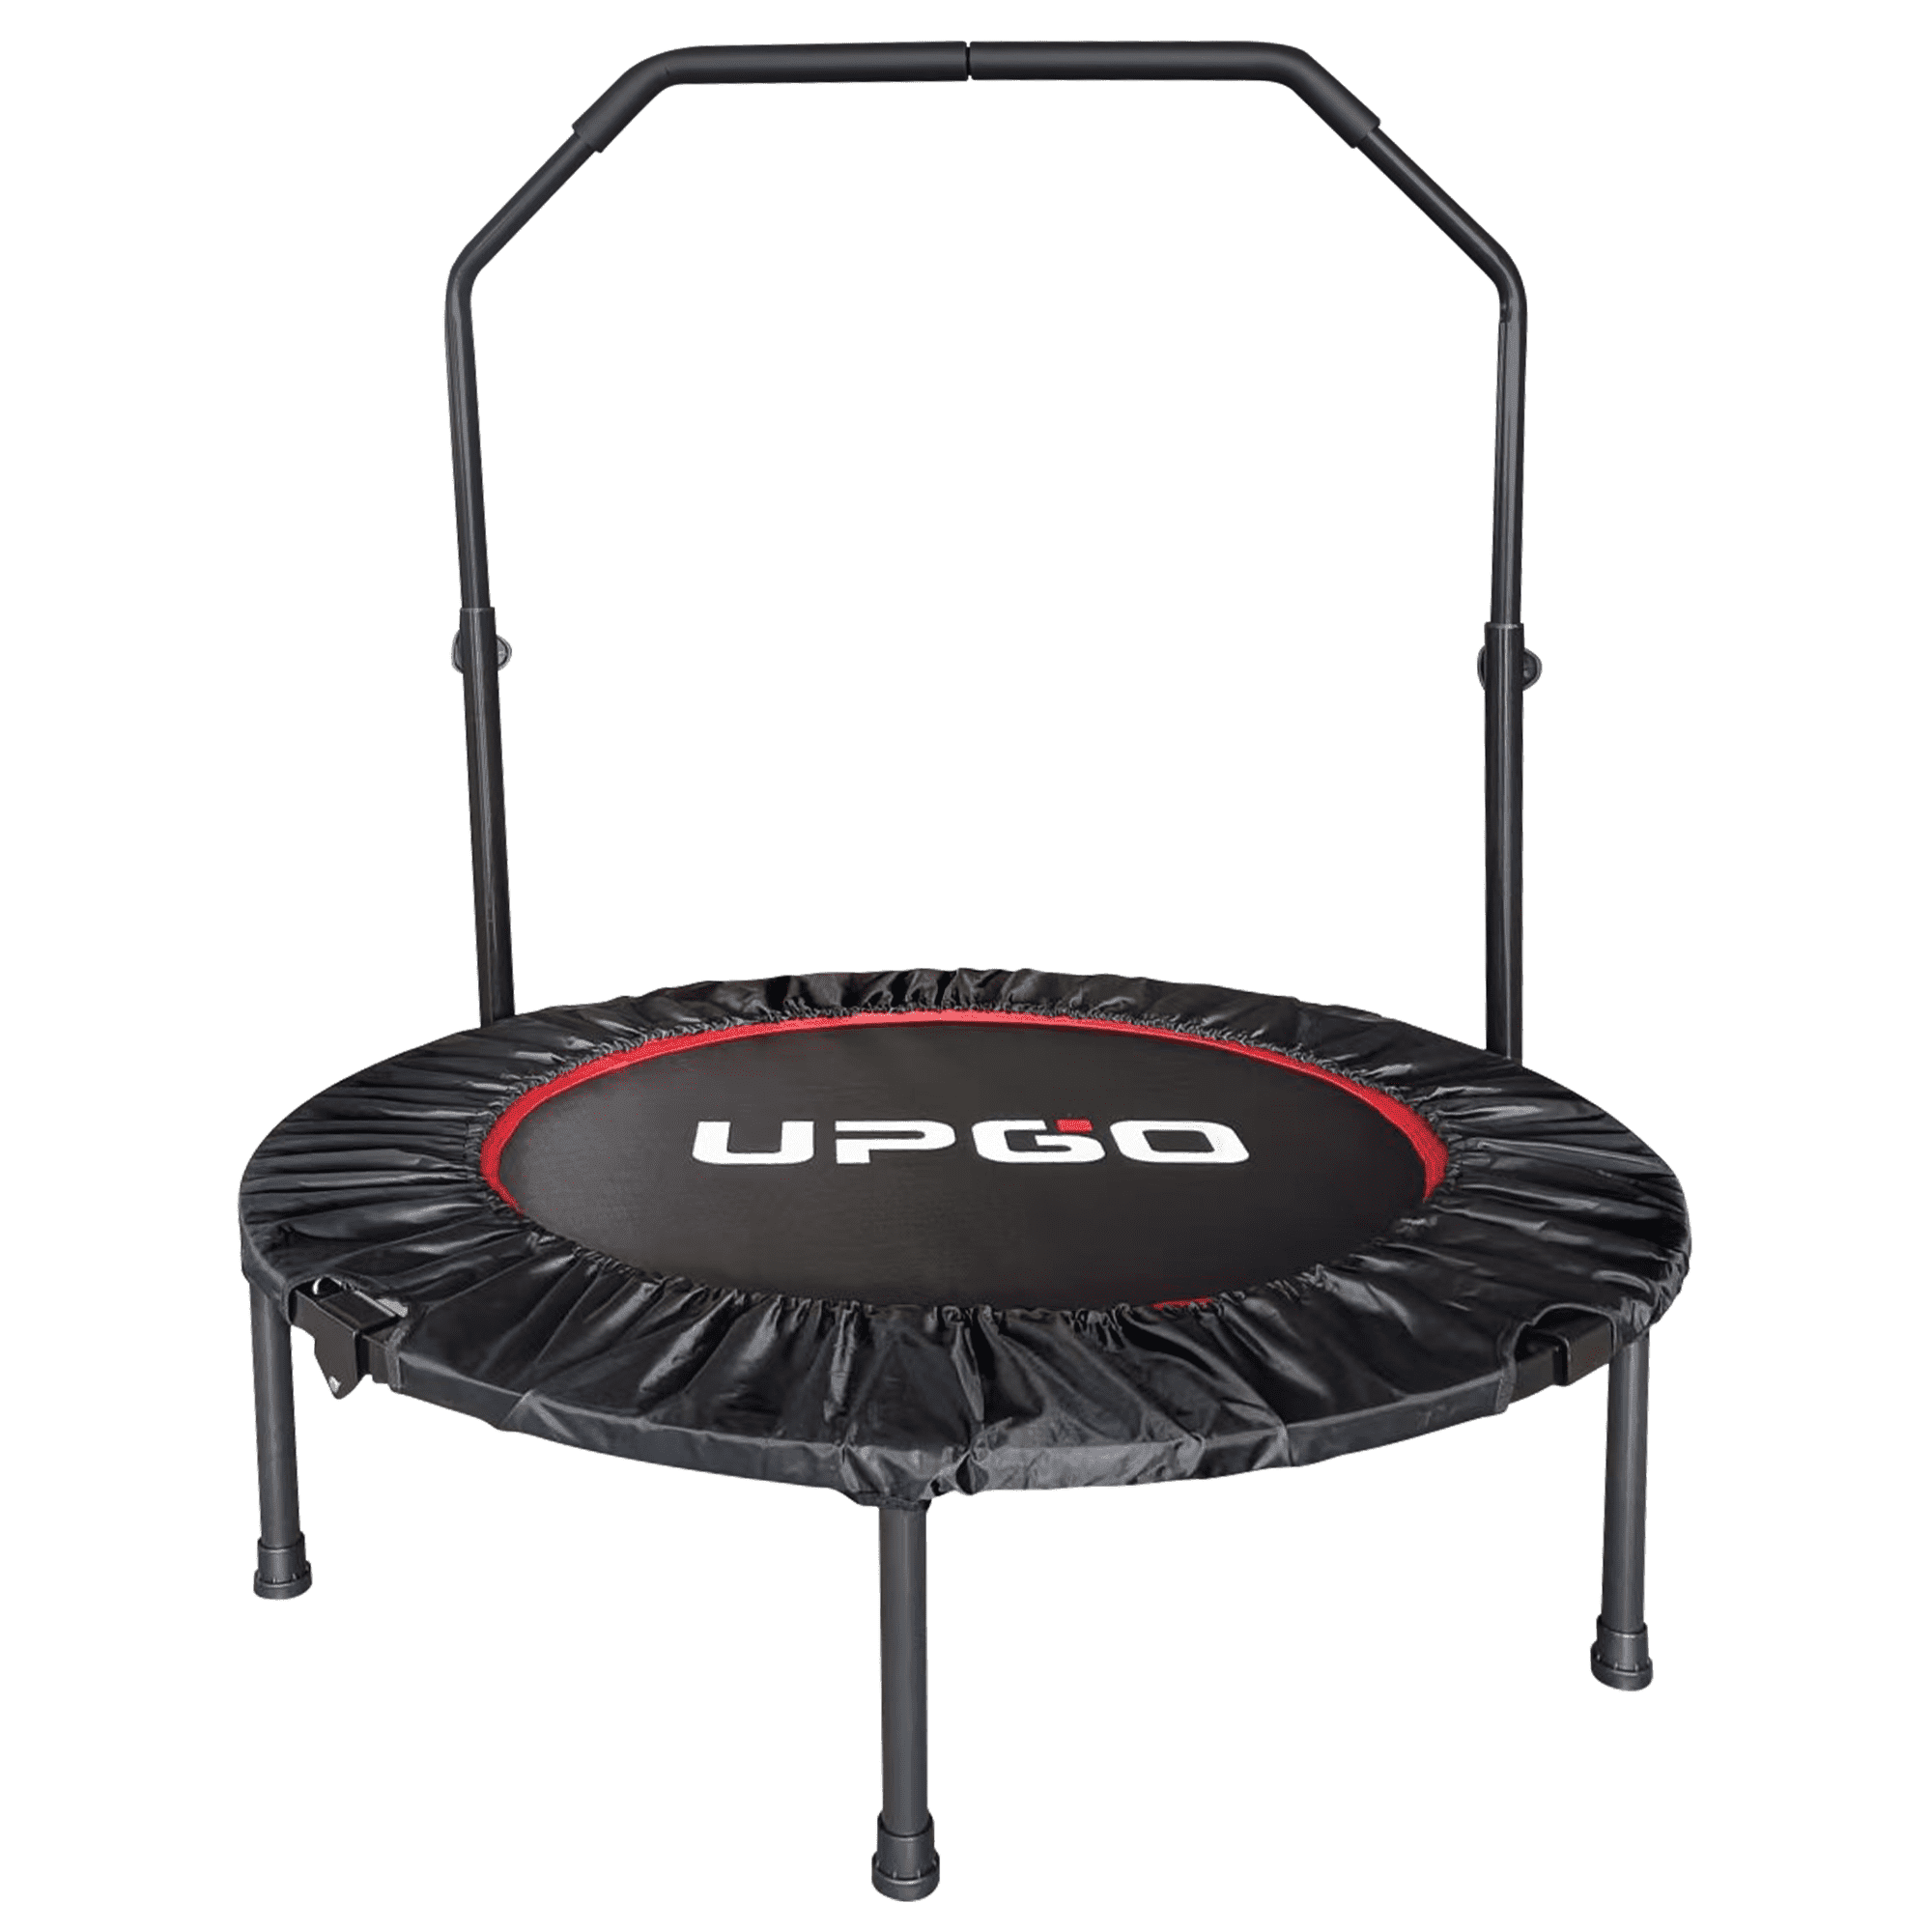 UPGO 40 Foldable Trampoline, Fitness Rebounder with Adjustable Foam  Handle, Exercise Trampoline for Adults Indoor/Garden Workout Max Load 330lbs